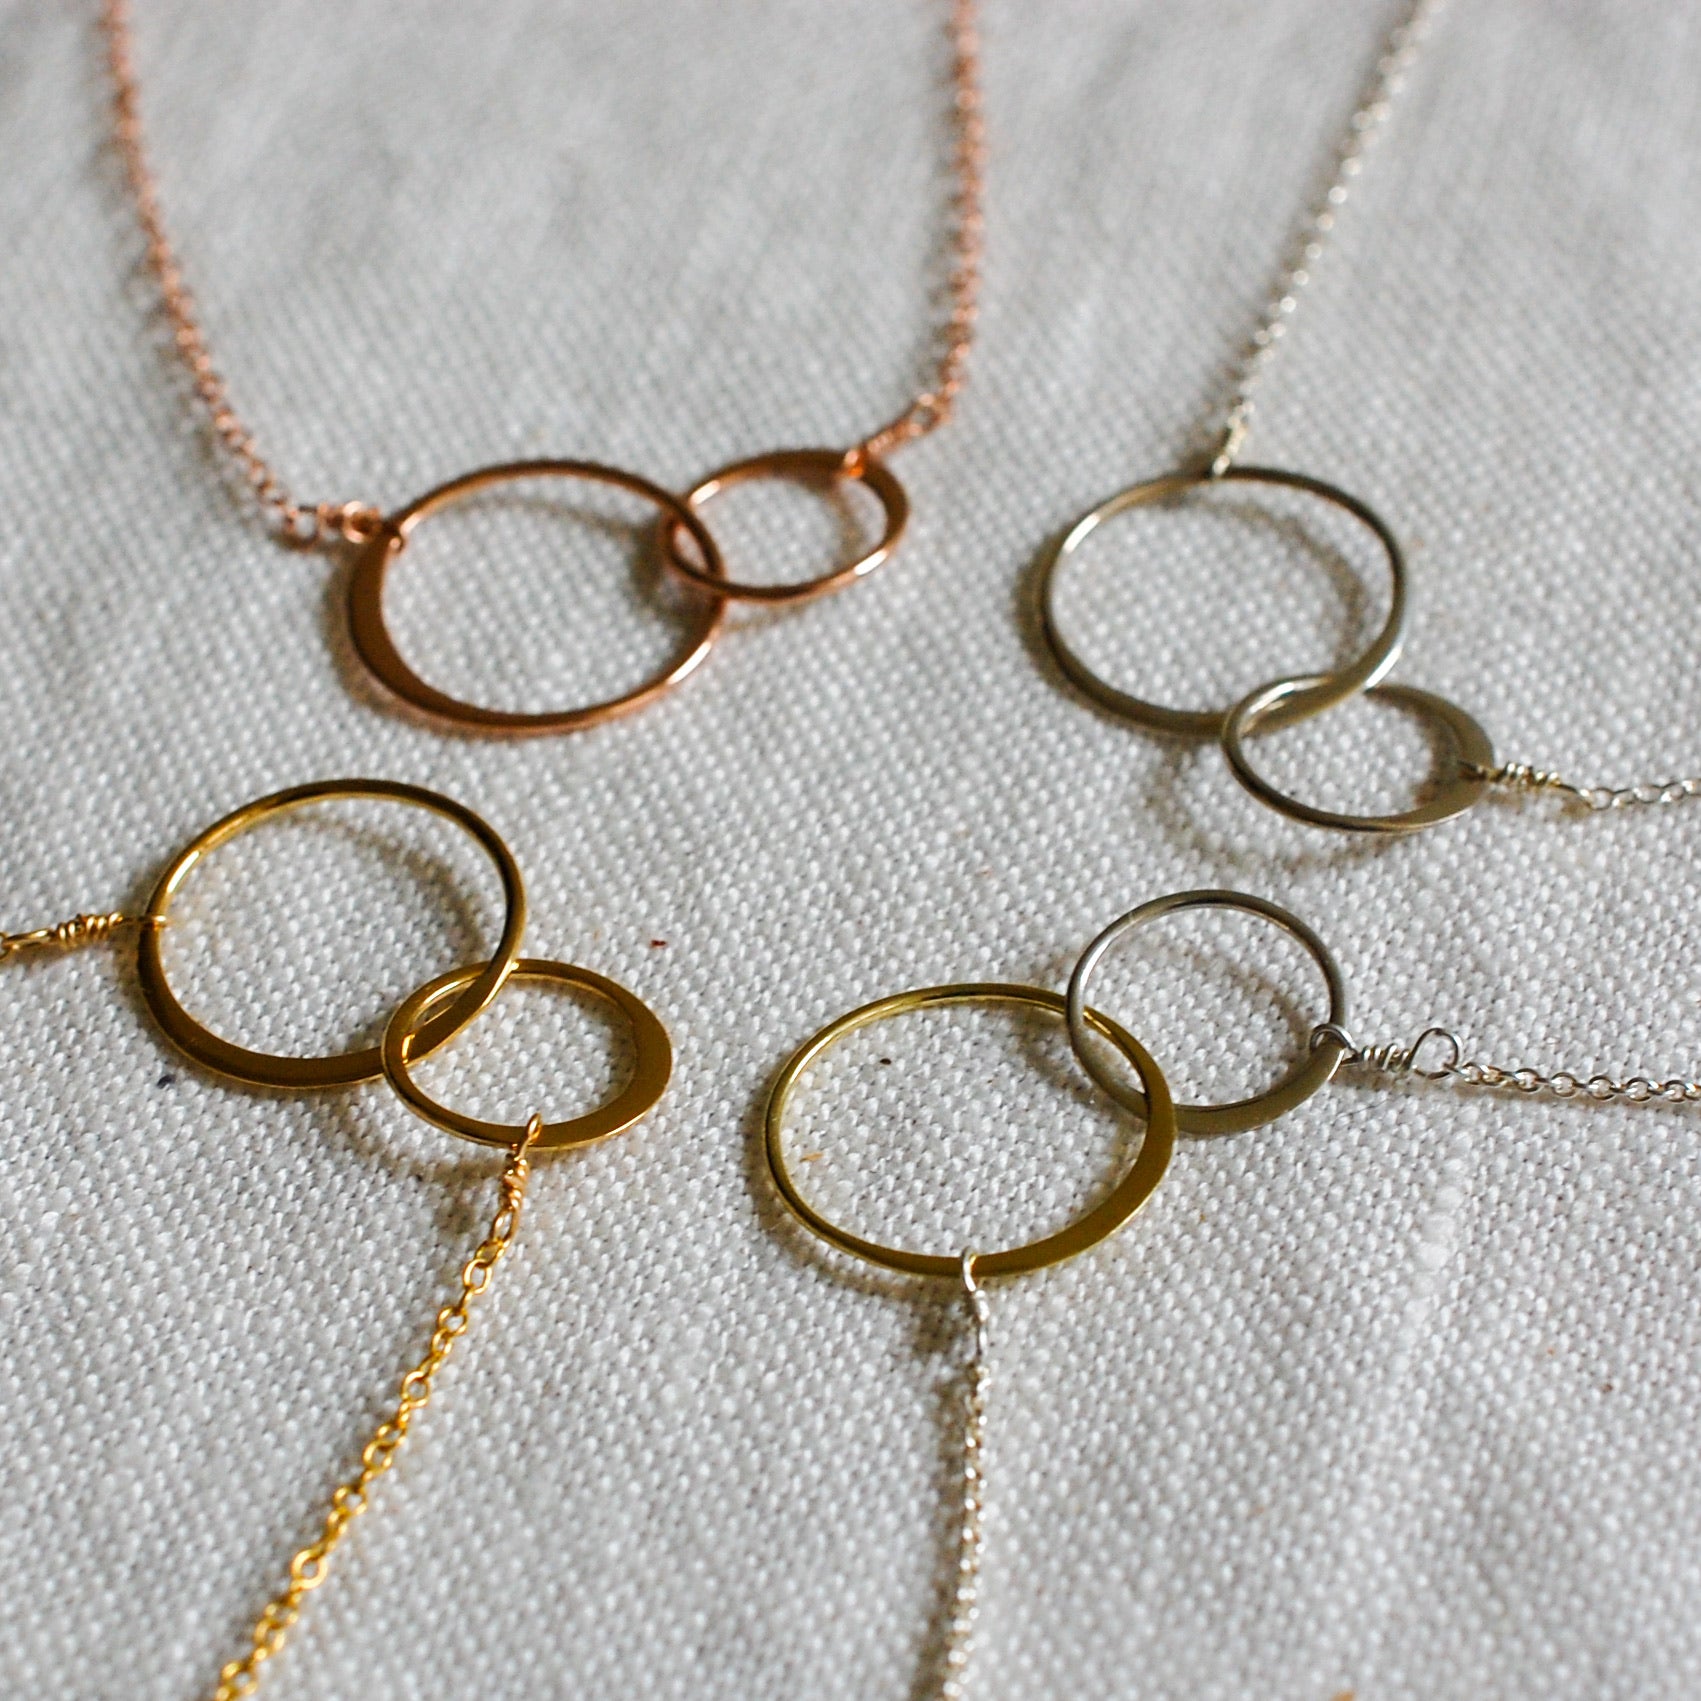 Russian Ring Necklace with 2 Rings - Gold Plated | MyNameNecklace IN